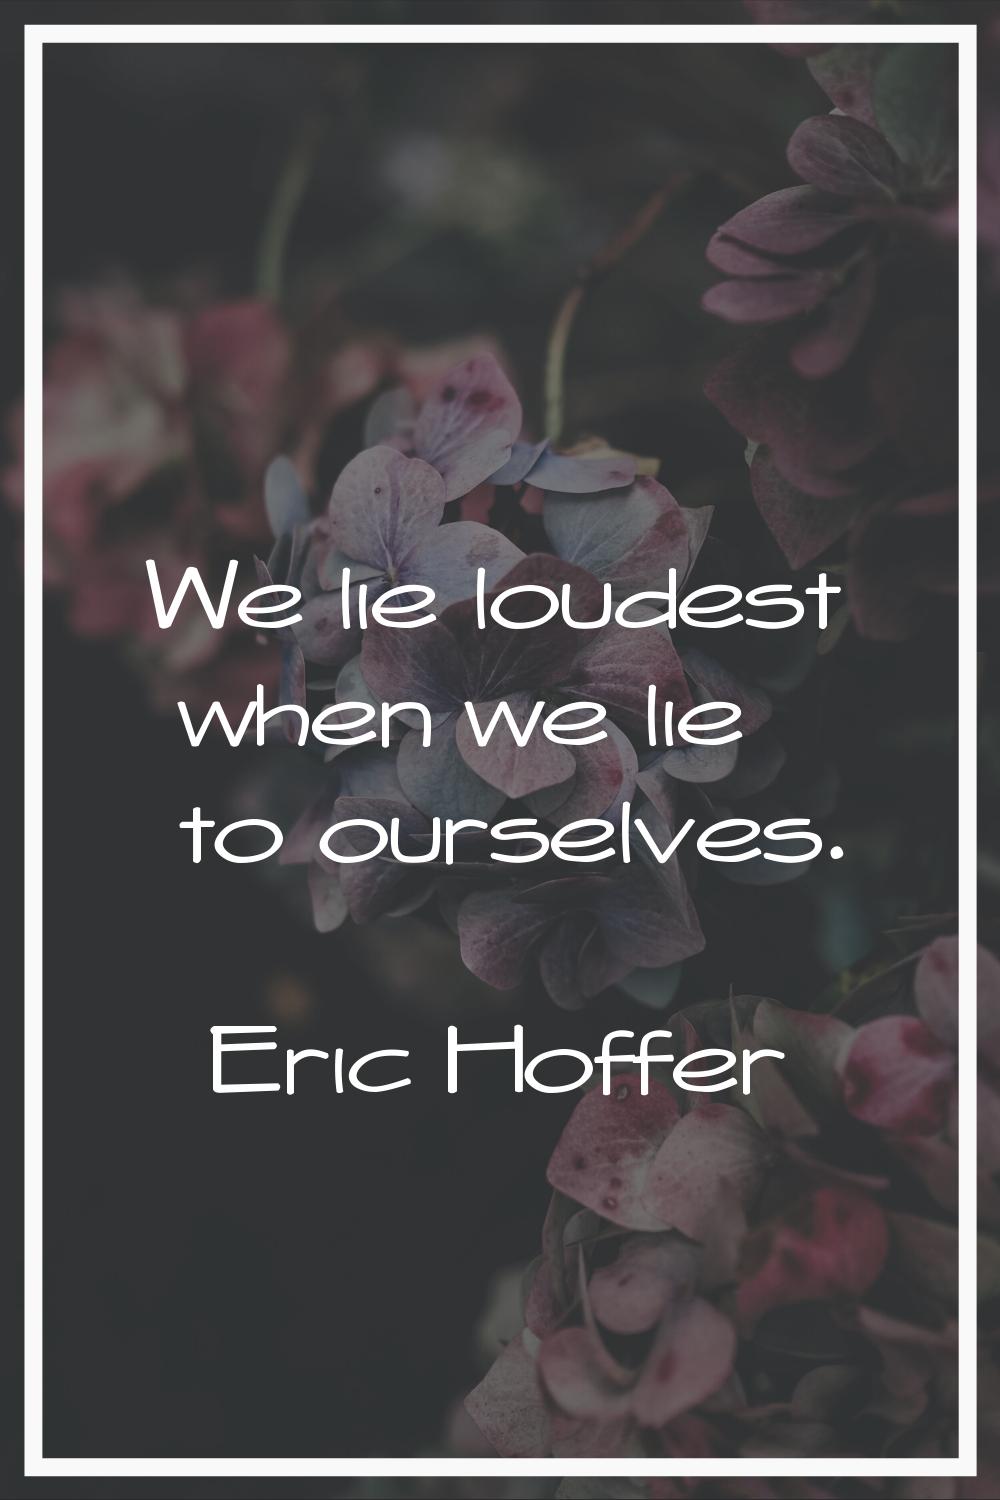 We lie loudest when we lie to ourselves.